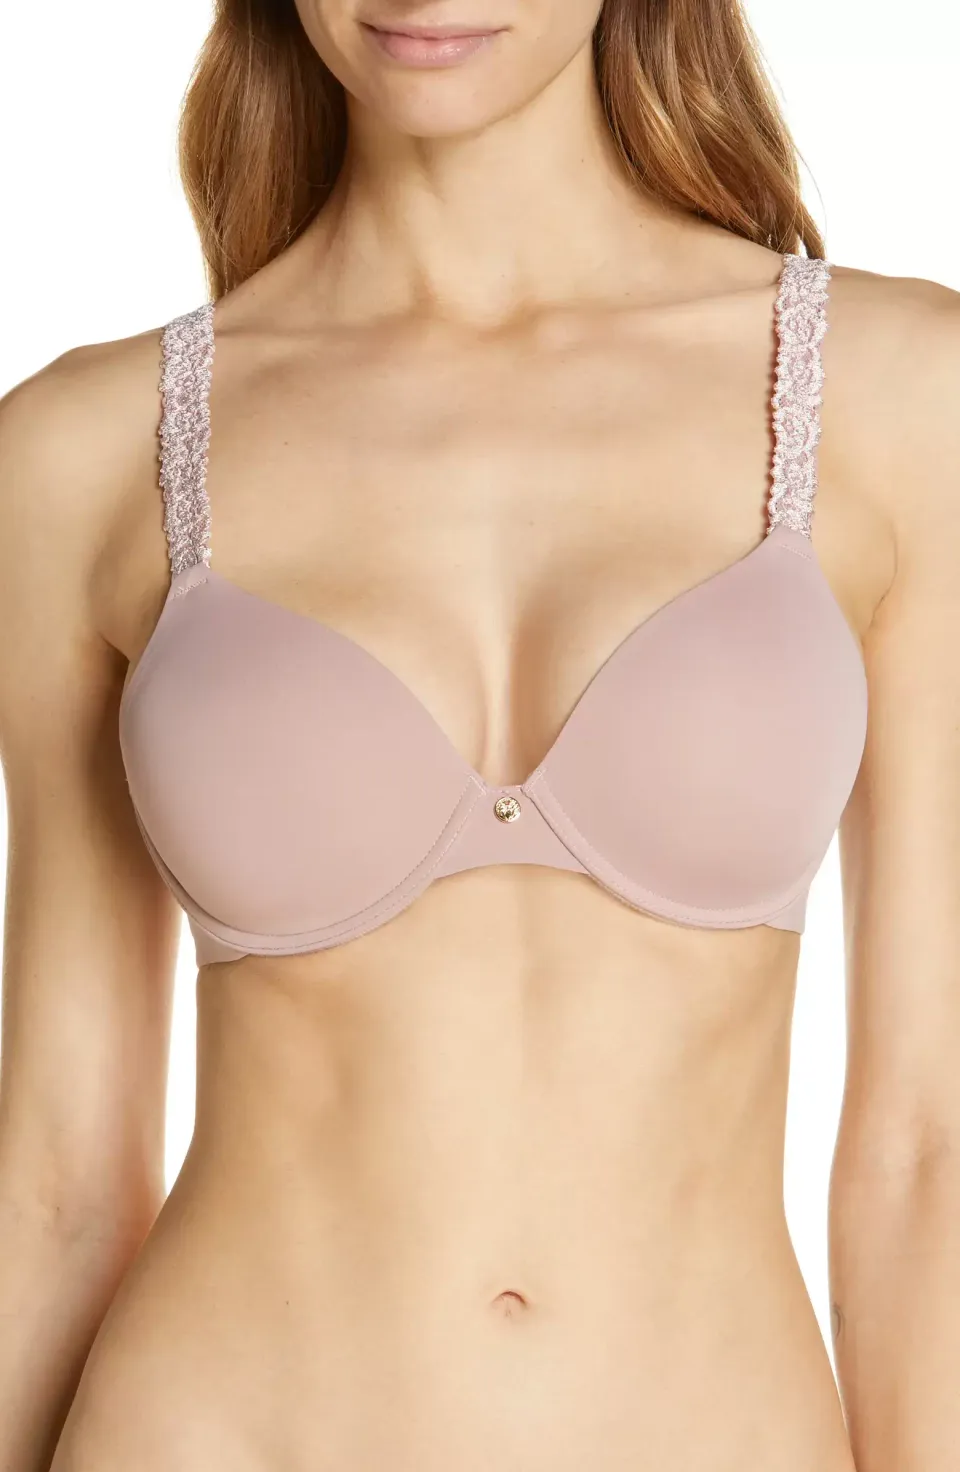 The Best Bras To Buy At Nordstrom, According To Reviews